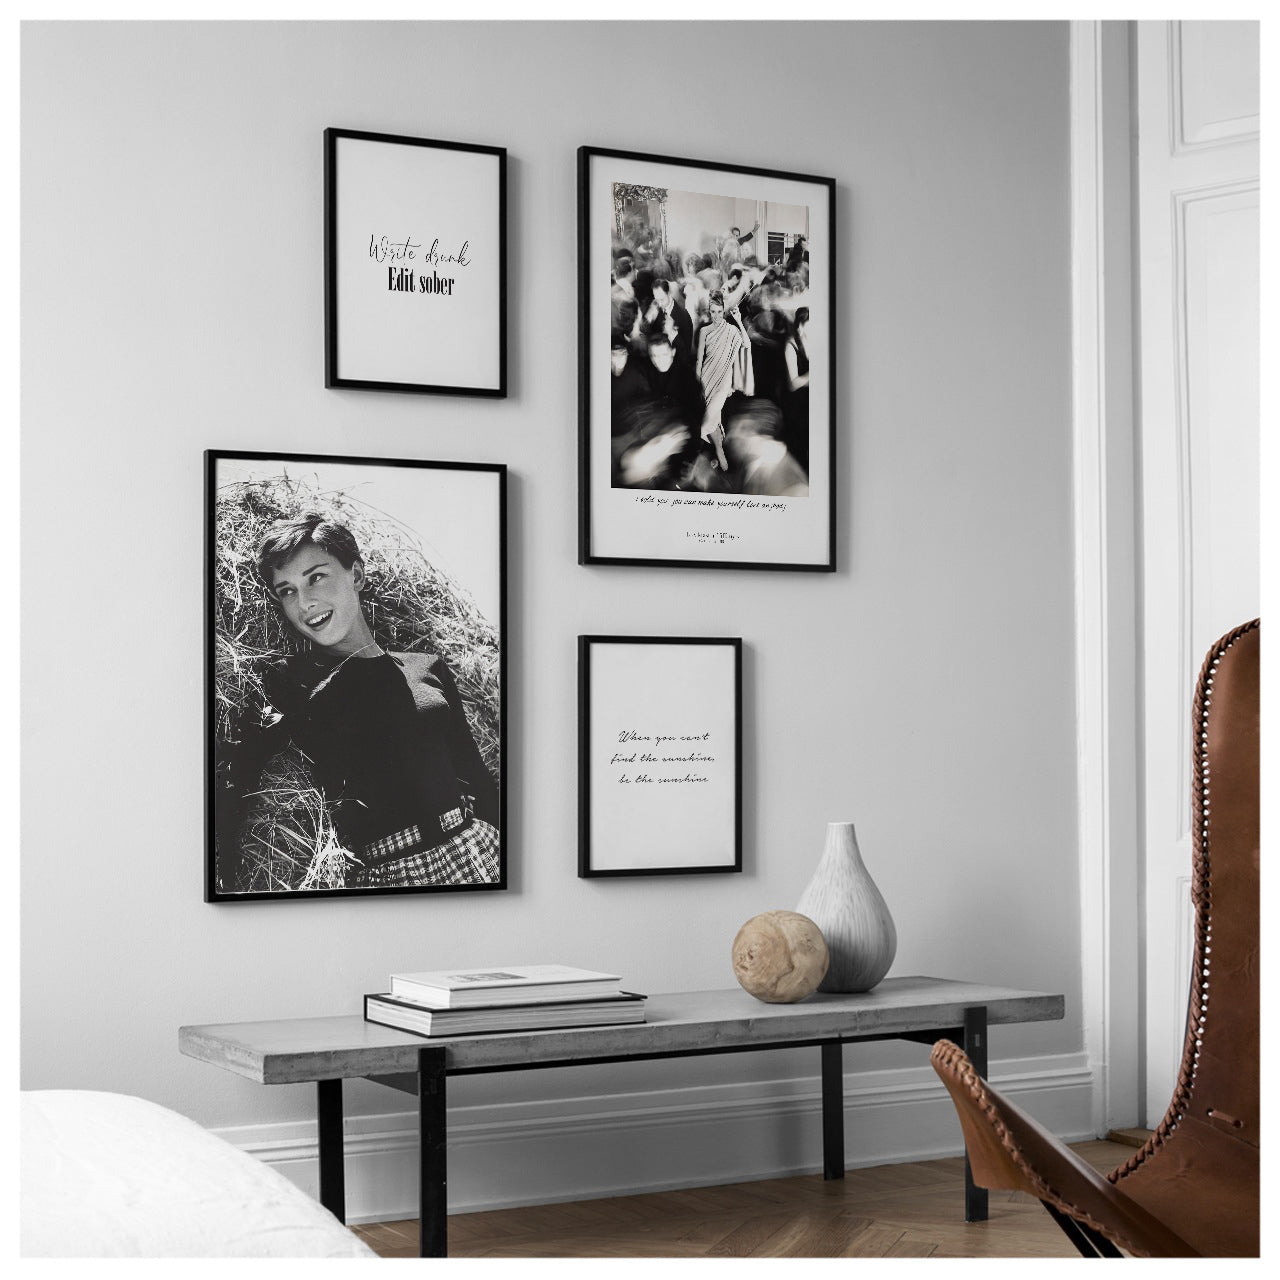 The Versatility of Posters: Adding Style and Personality to Your Space